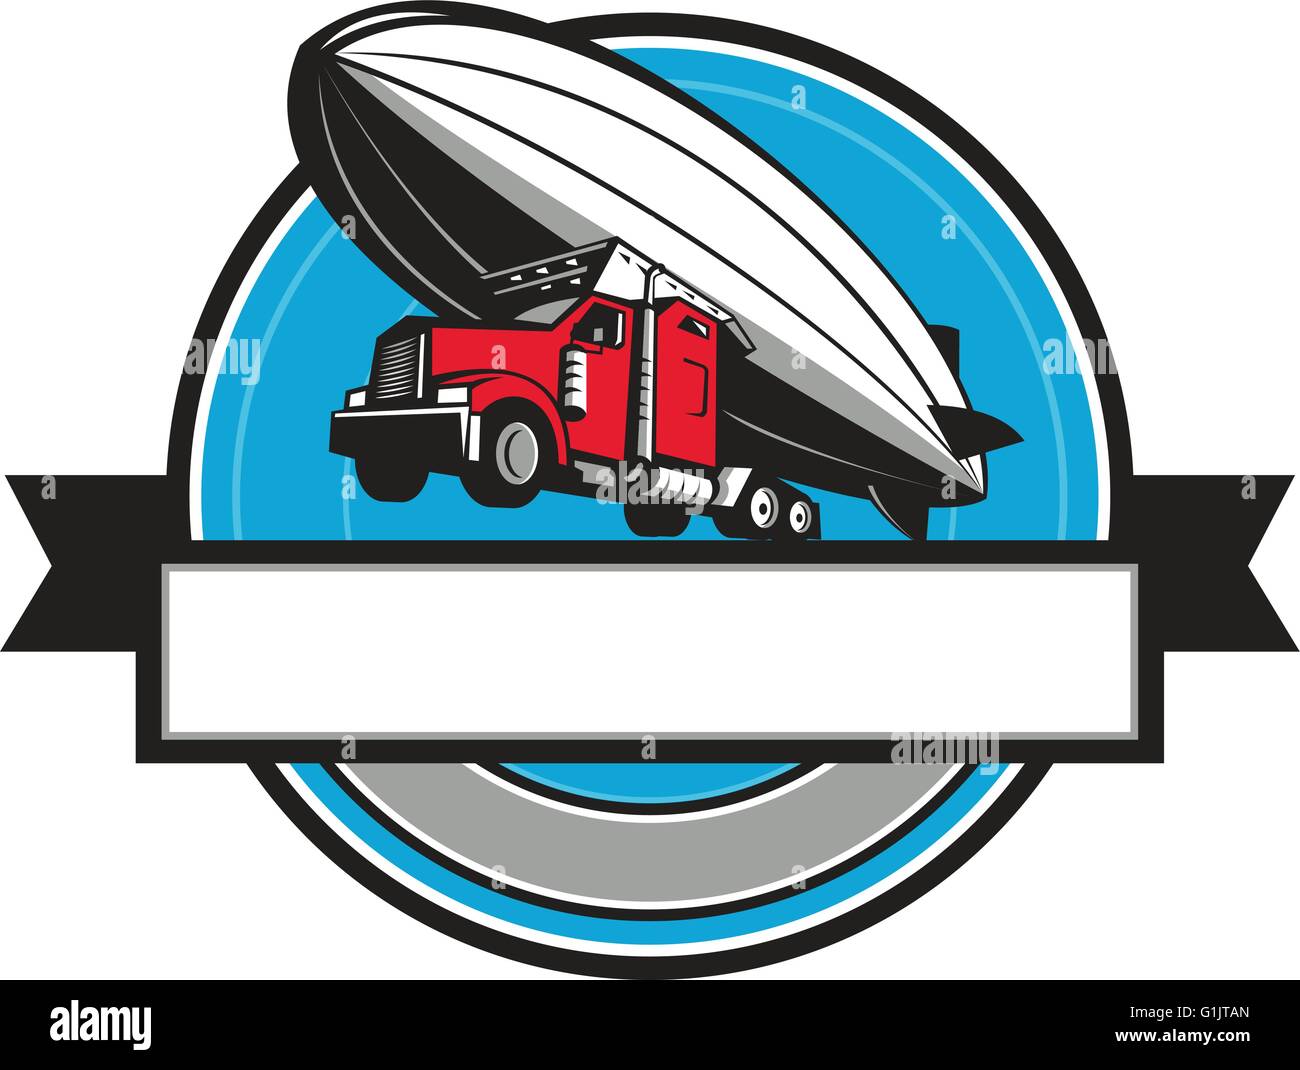 Illustration of a half semi-truck tractor trailer and zeppelin blimp flying overhead set inside circle with ribbon done in retro style. Stock Vector